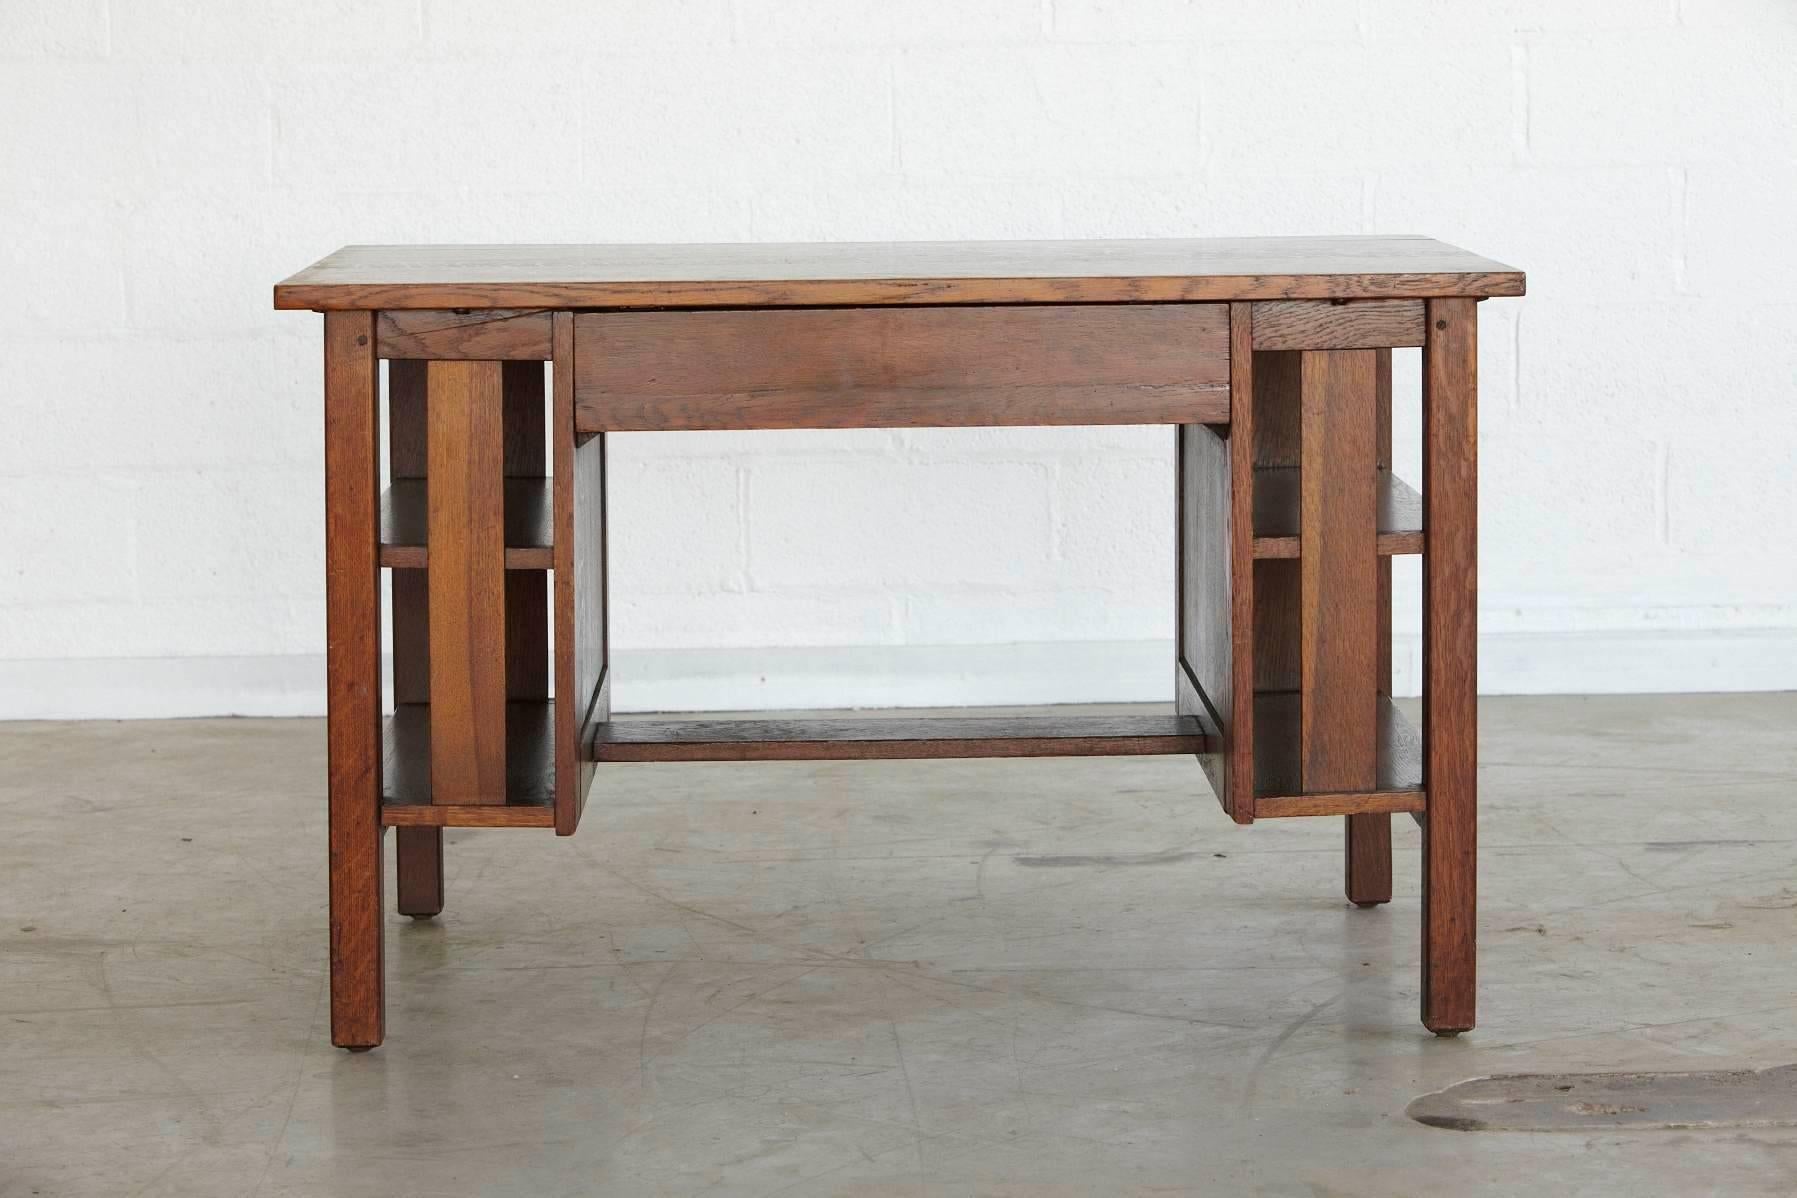 Arts and Crafts Arts & Crafts Mission Style Oak Library Table 2 from the Estate of José Ferrer